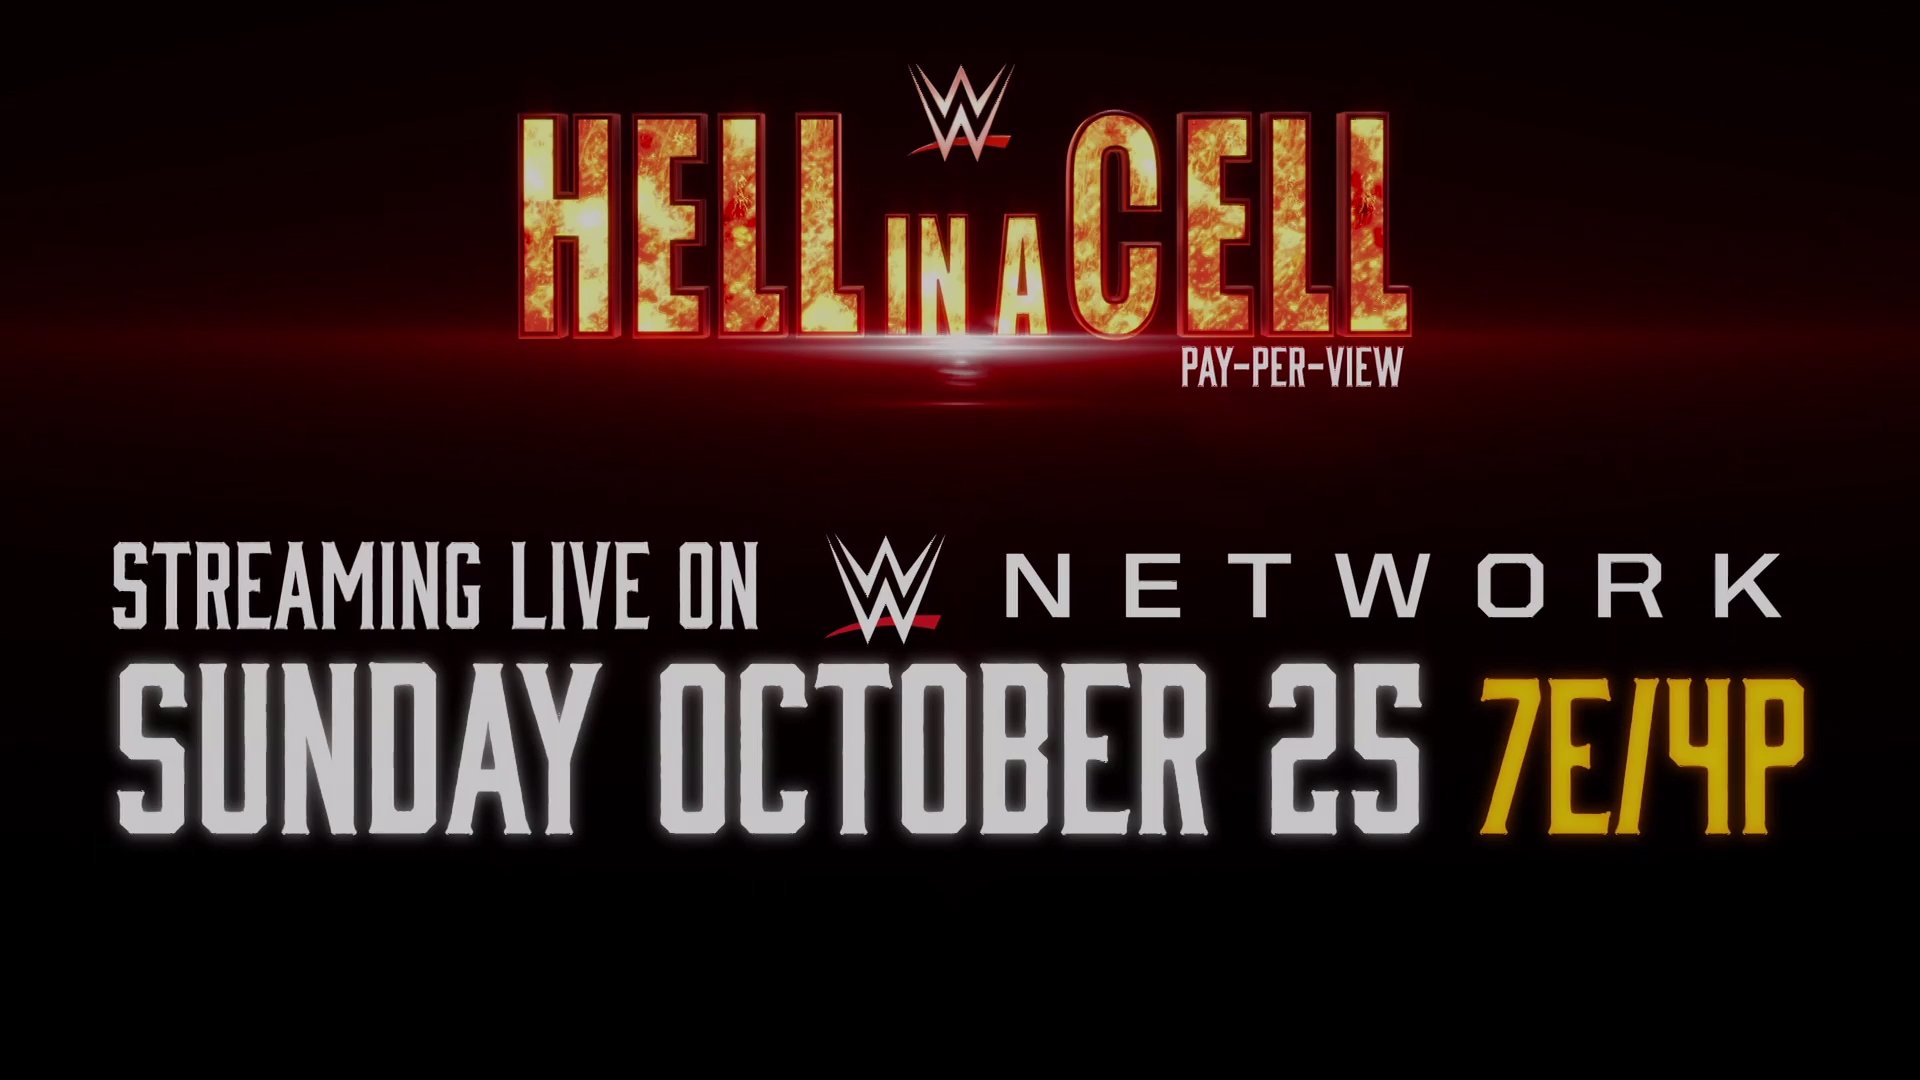 WWE anuncia data do Hell in a Cell